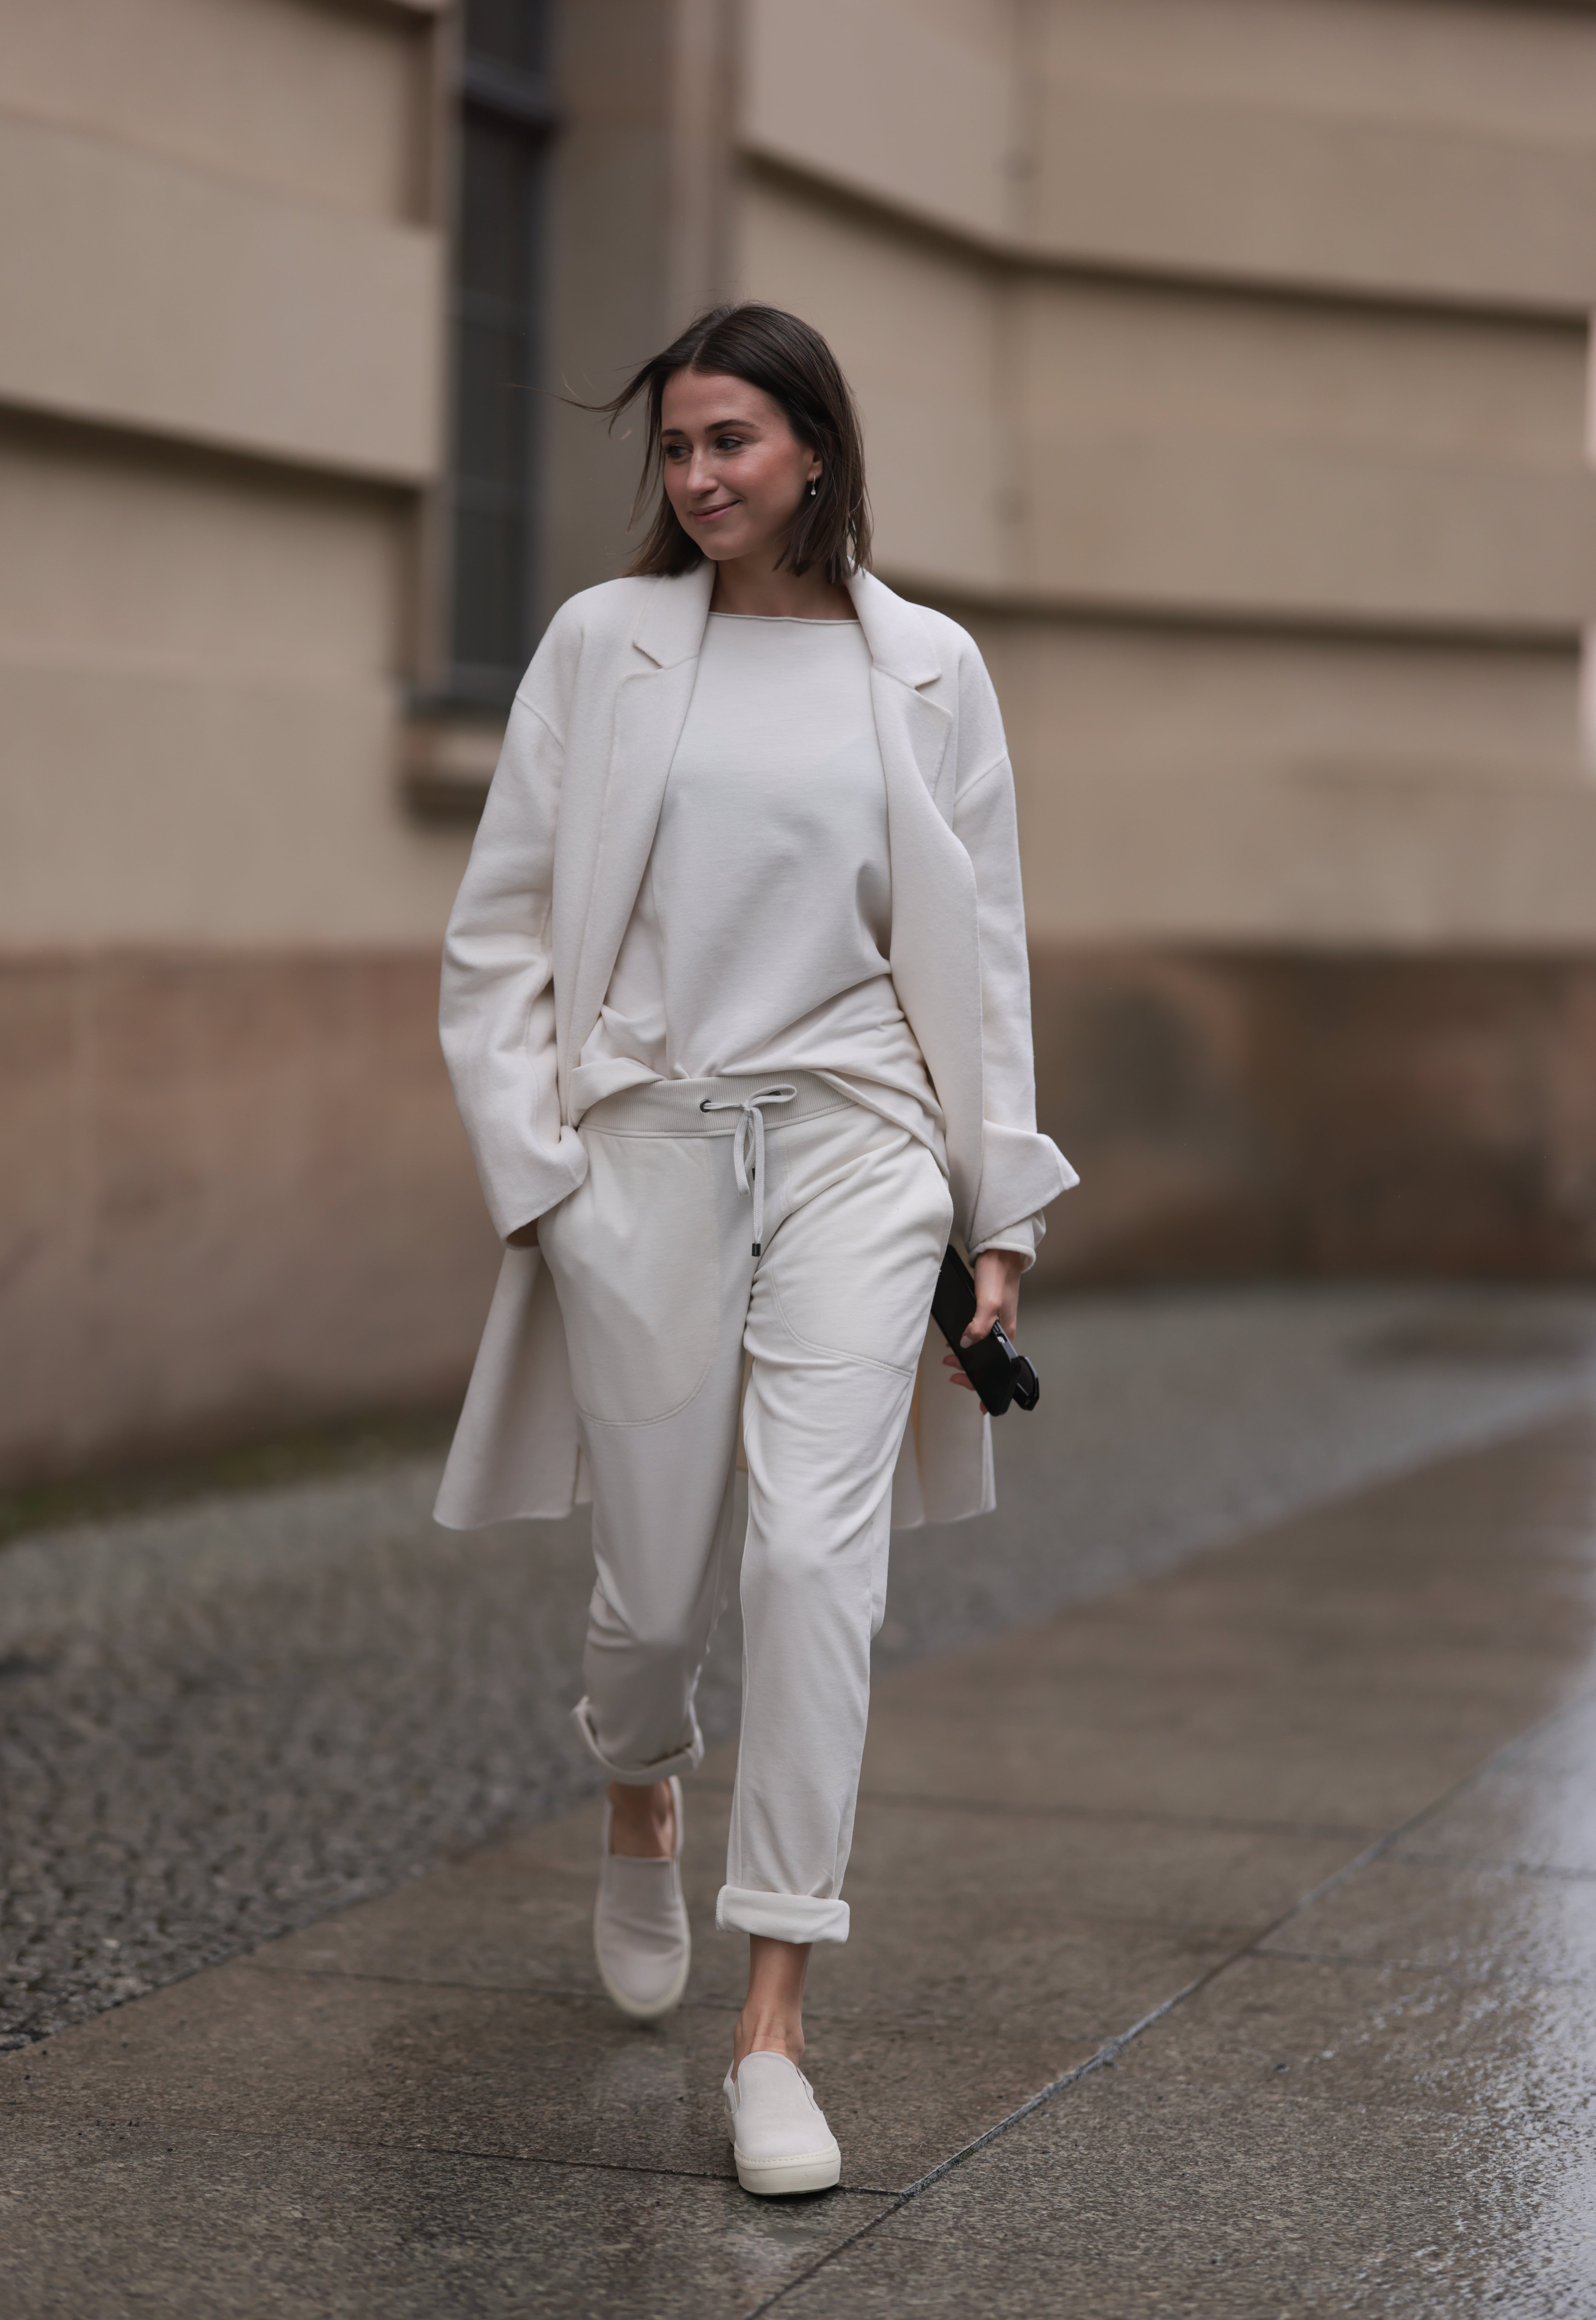 White Pants Outfits For Women After 50 (22 ideas & outfits)